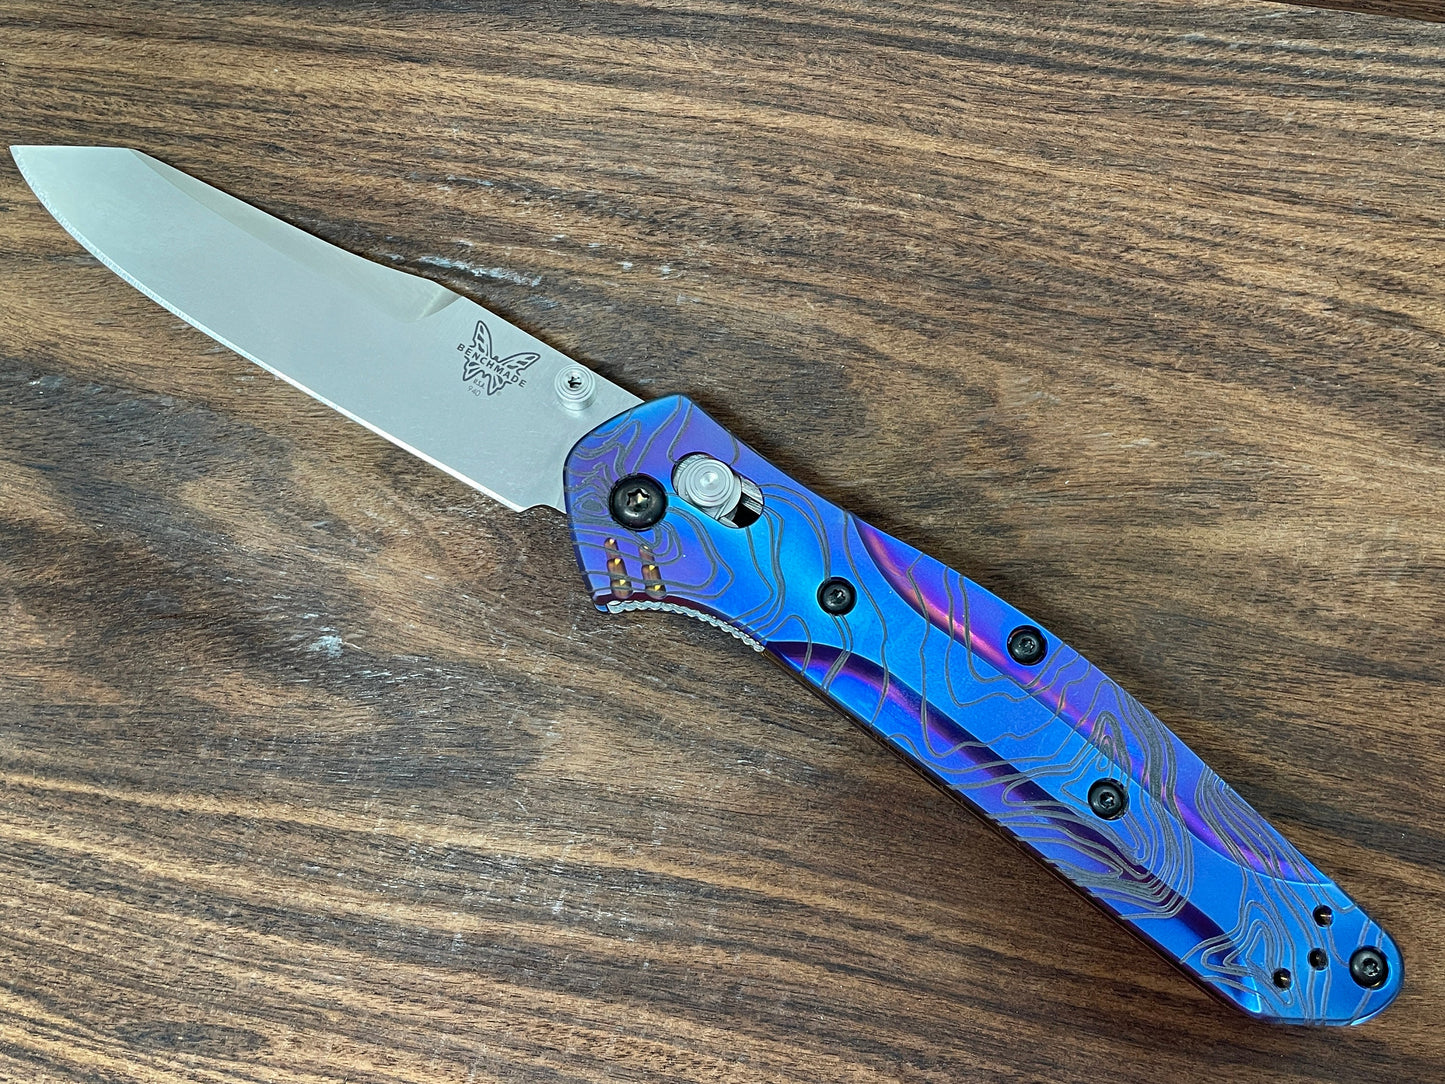 FRAG milled Blue Ano Titanium Scales for Benchmade 940 Osborne